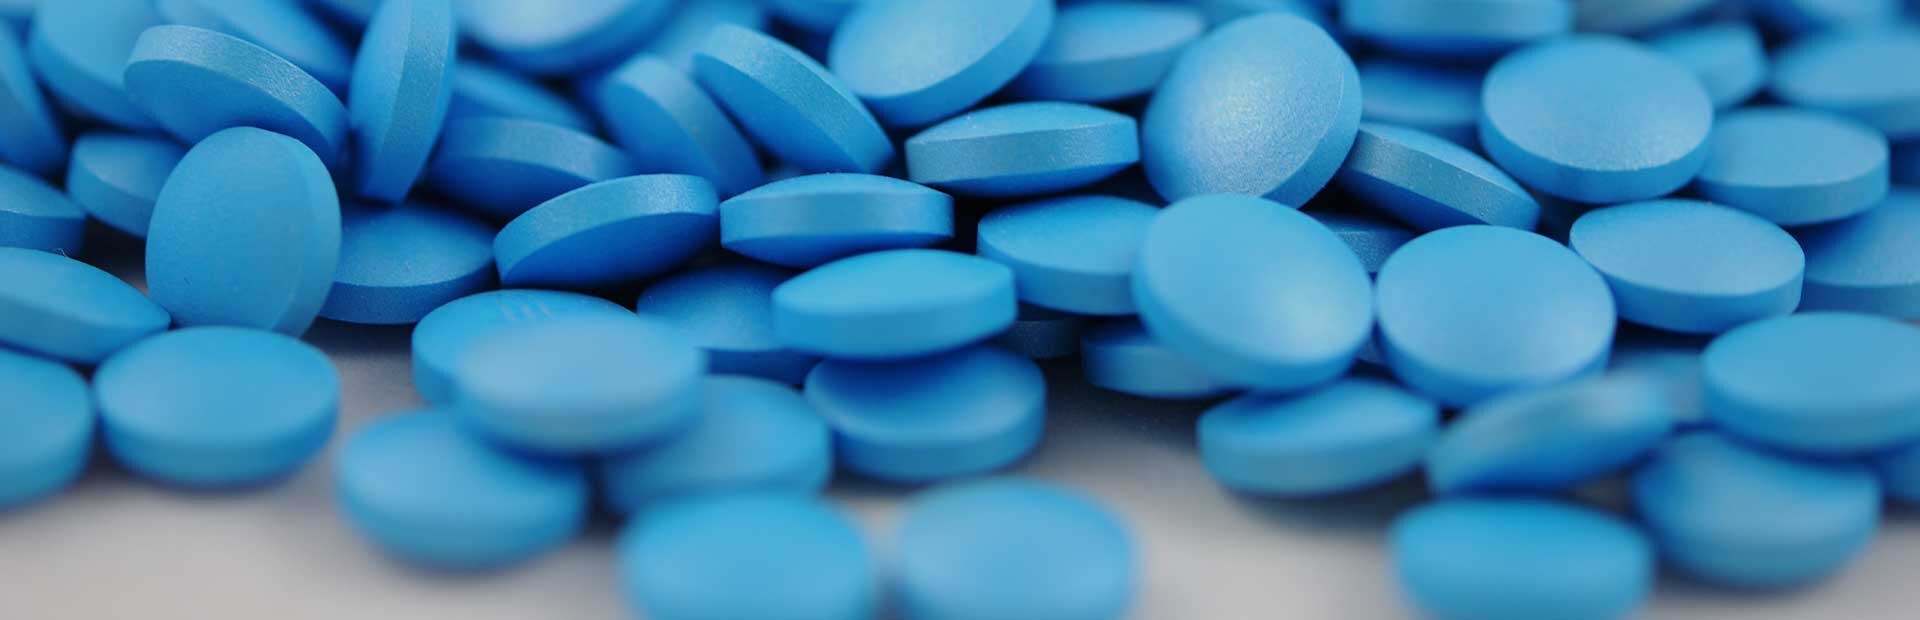 A loose pile of small round blue pills